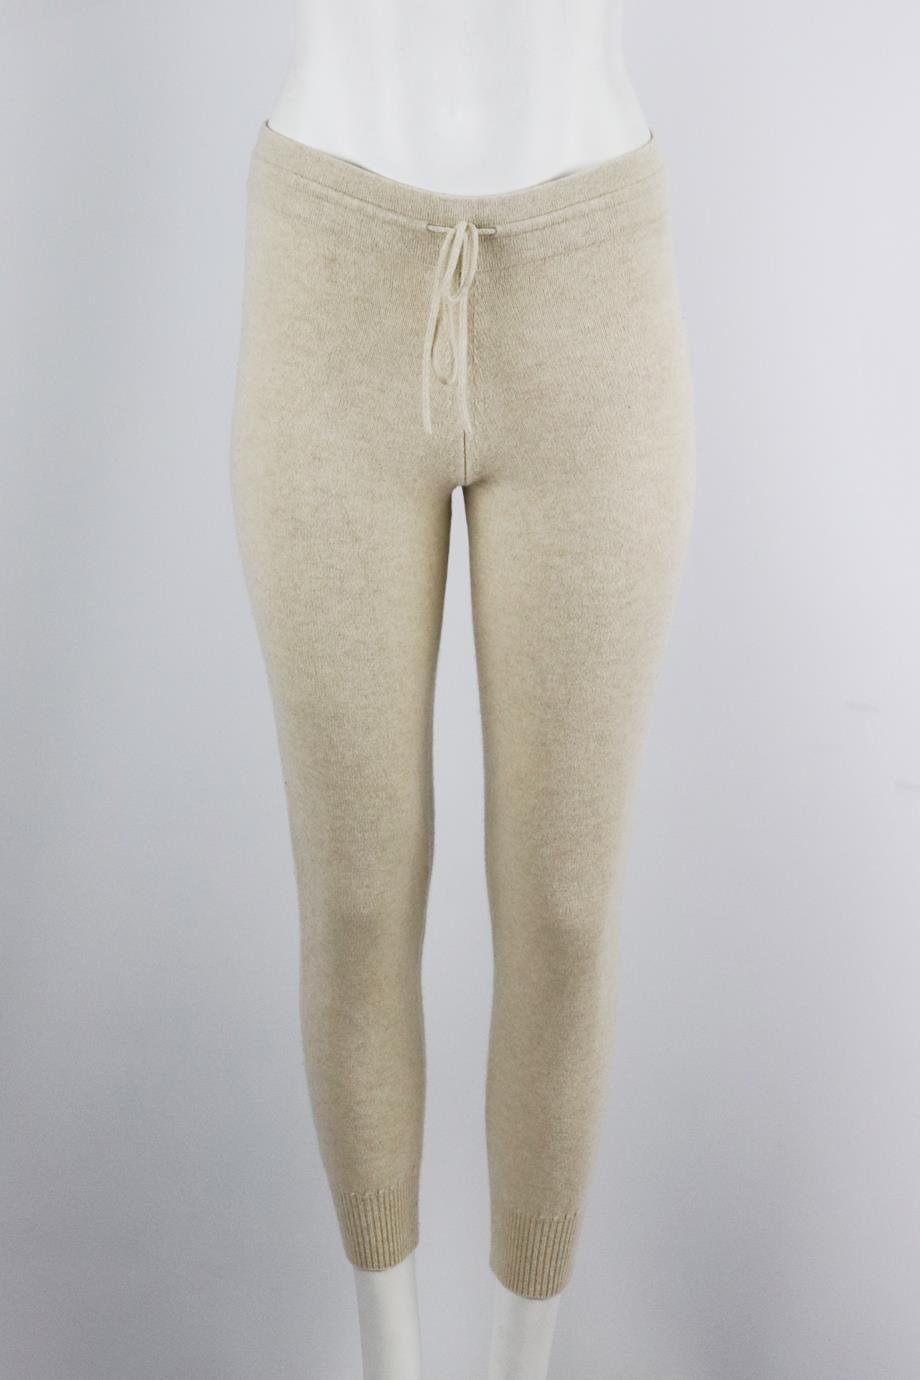 THEORY WOOL AND CASHMERE BLEND PANTS XSMALL